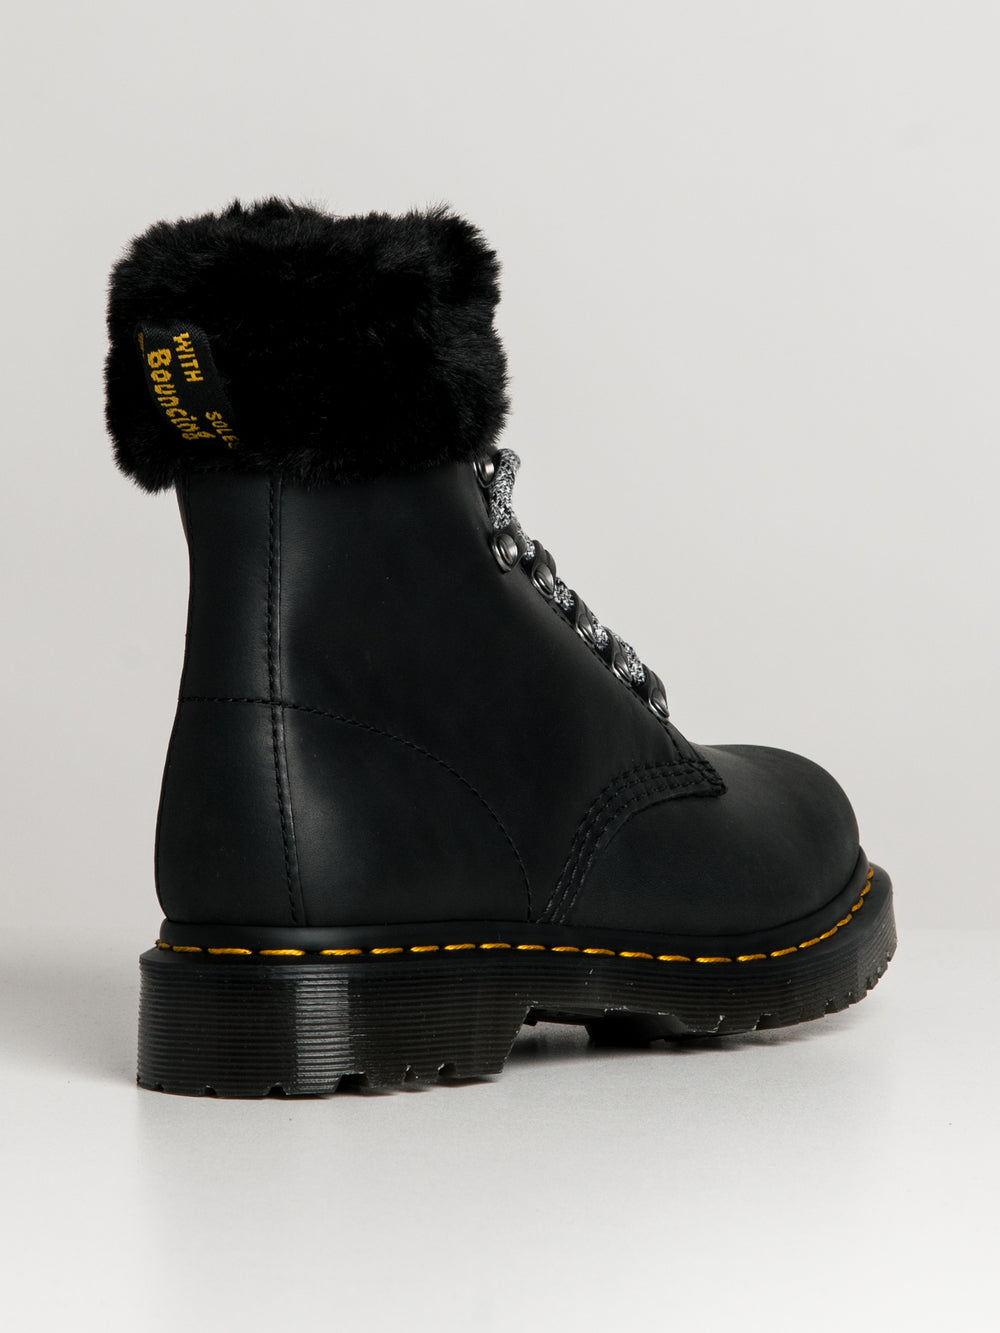 WOMENS DR MARTENS 1460 SERENA COLLAR STREETER BOOT - CLEARANCE